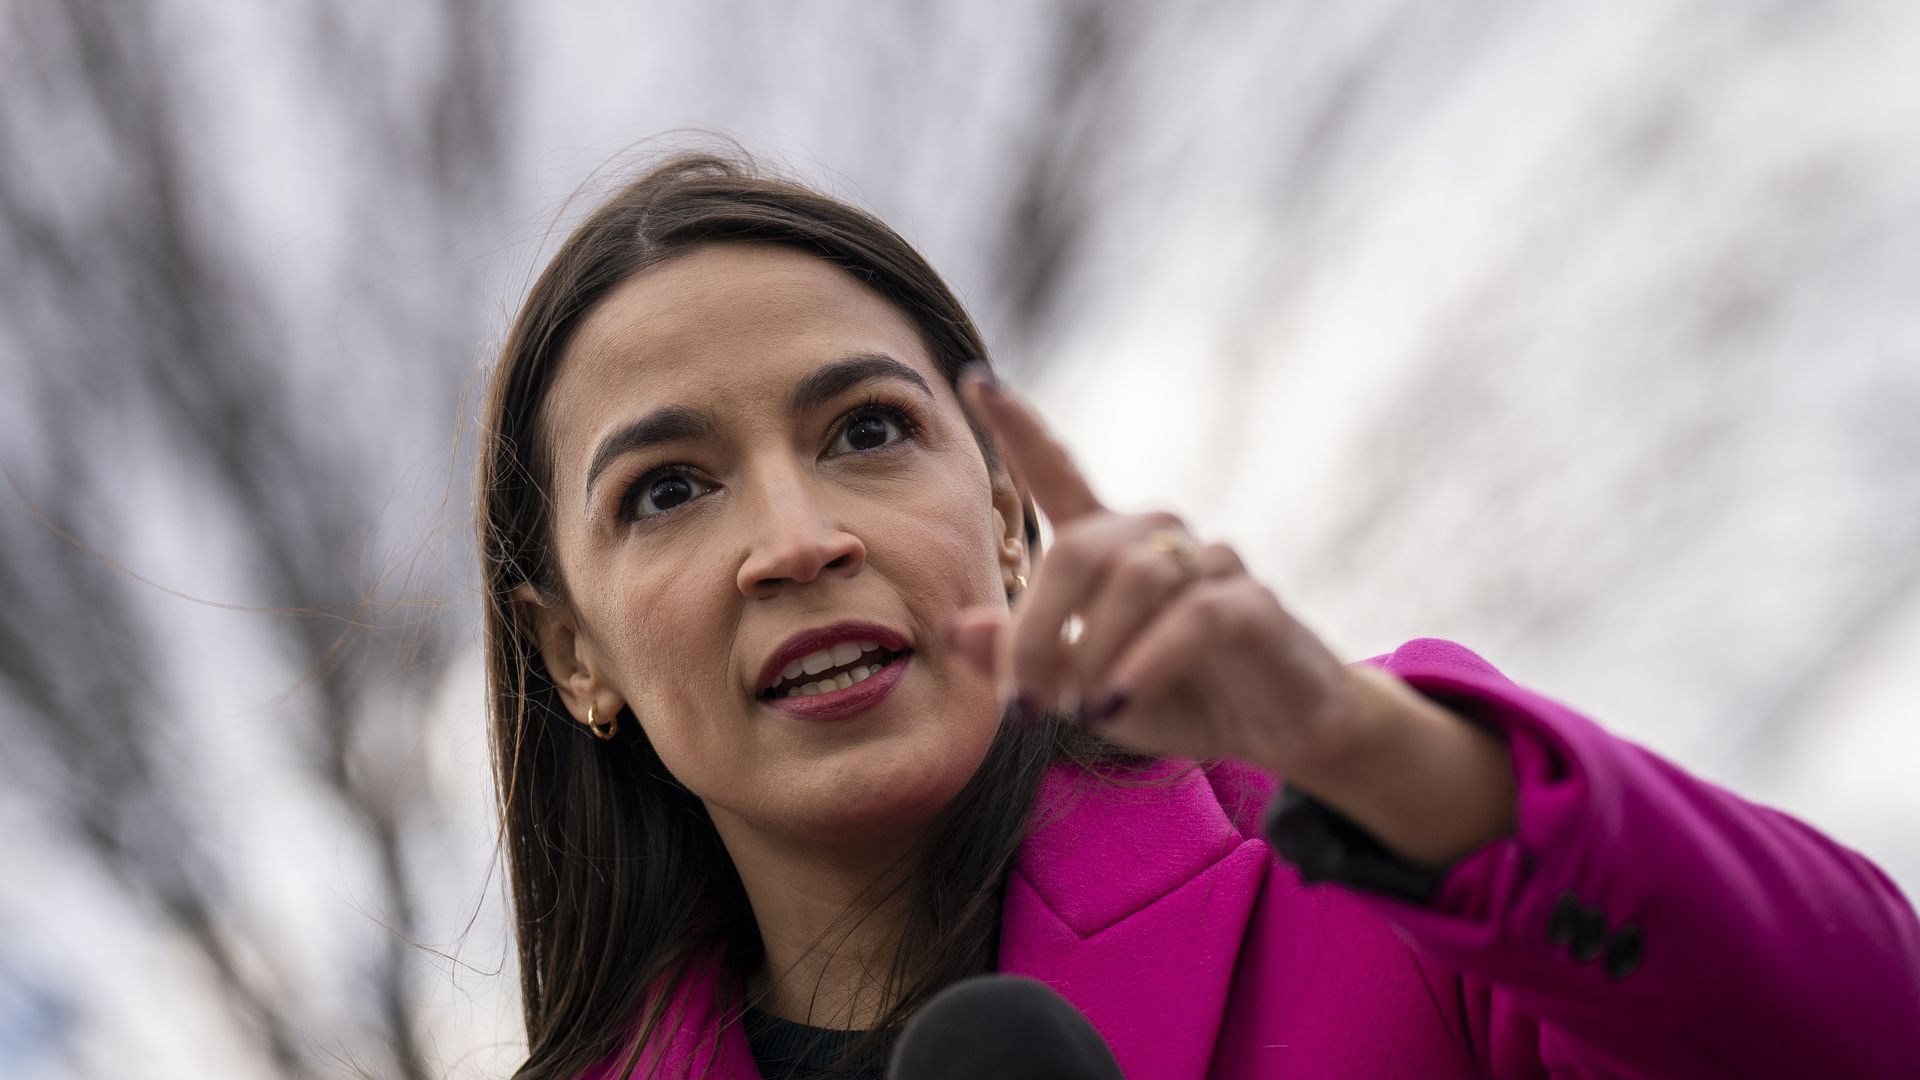 Rep. Alexandria Ocasio-Cortez (D-NY) speaks during a news conference with Democratic lawmakers about the Biden administrations border politics, outside the U.S. Capitol on January 26, 2023 in Washington, DC